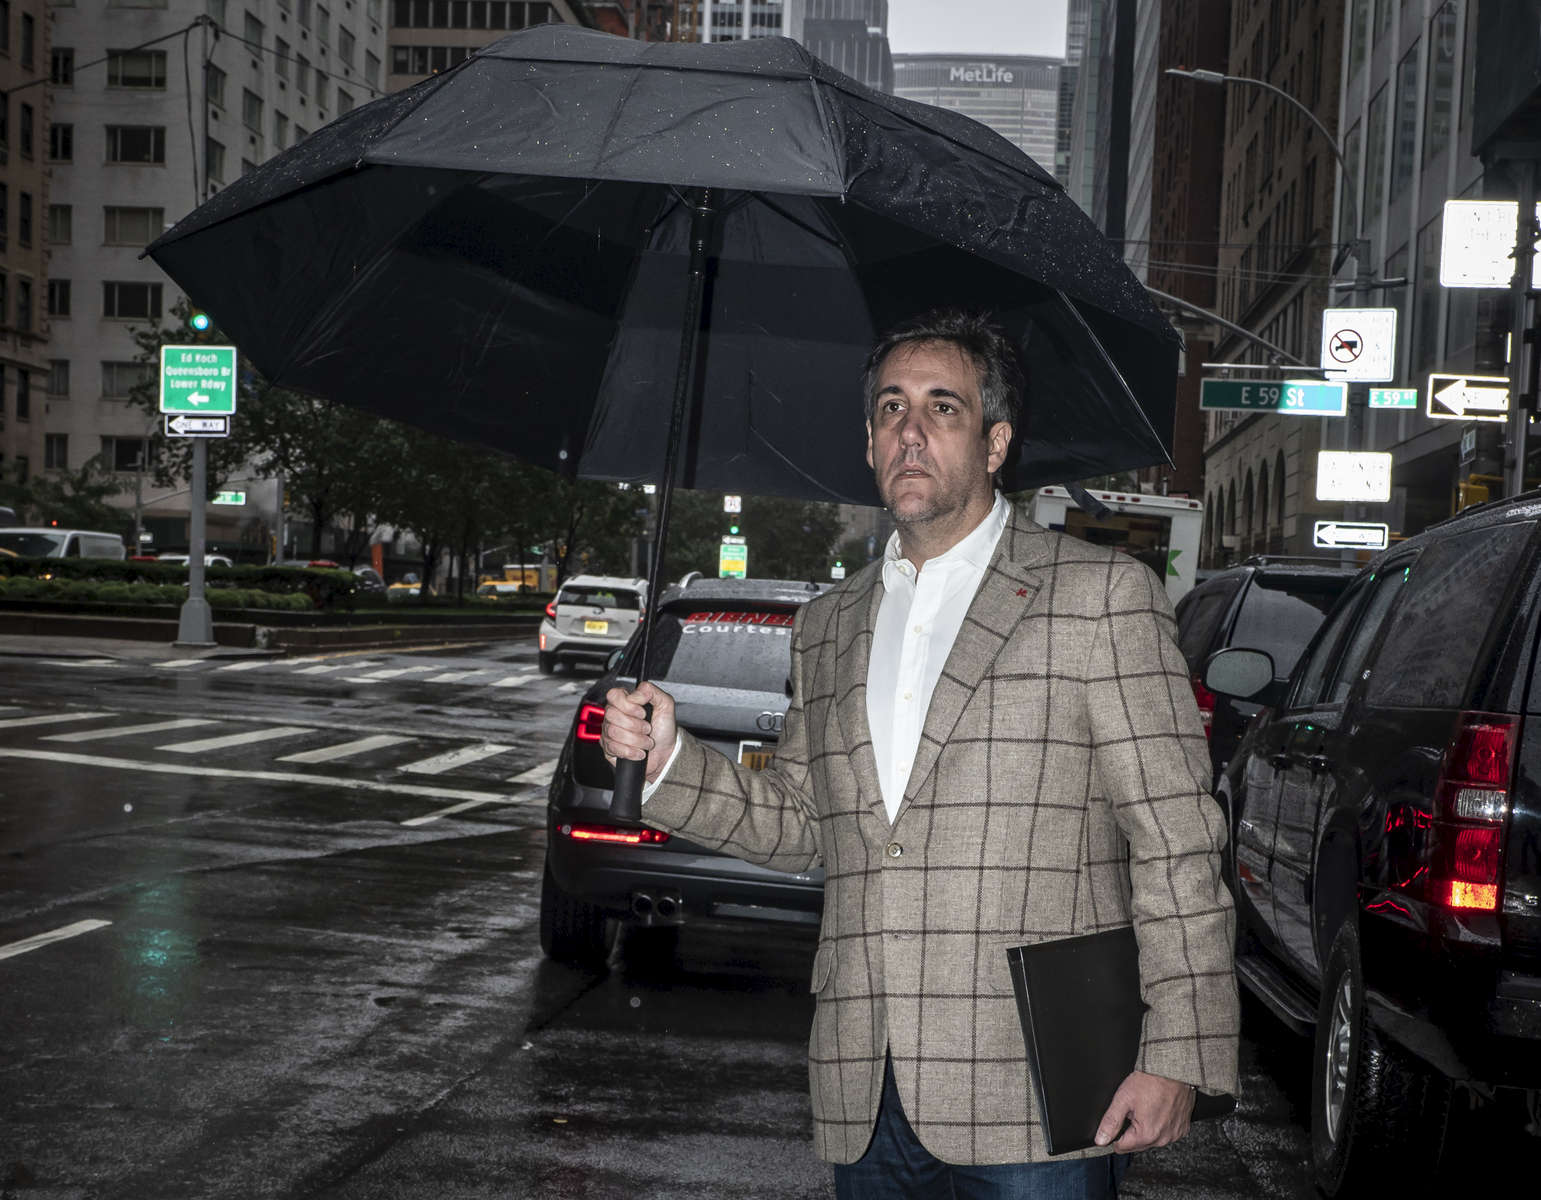 Lawyer Michael Cohen, who is the former lawyer of President Donald Trump, waits to get a taxi in front of Trump Park Avenue in Manhattan on Tuesday, September 25, 2018. He pleaded guilty to eight counts of campaign finance violations, tax fraud, and bank fraud. Michael Cohen was sentenced to three years in federal prison.